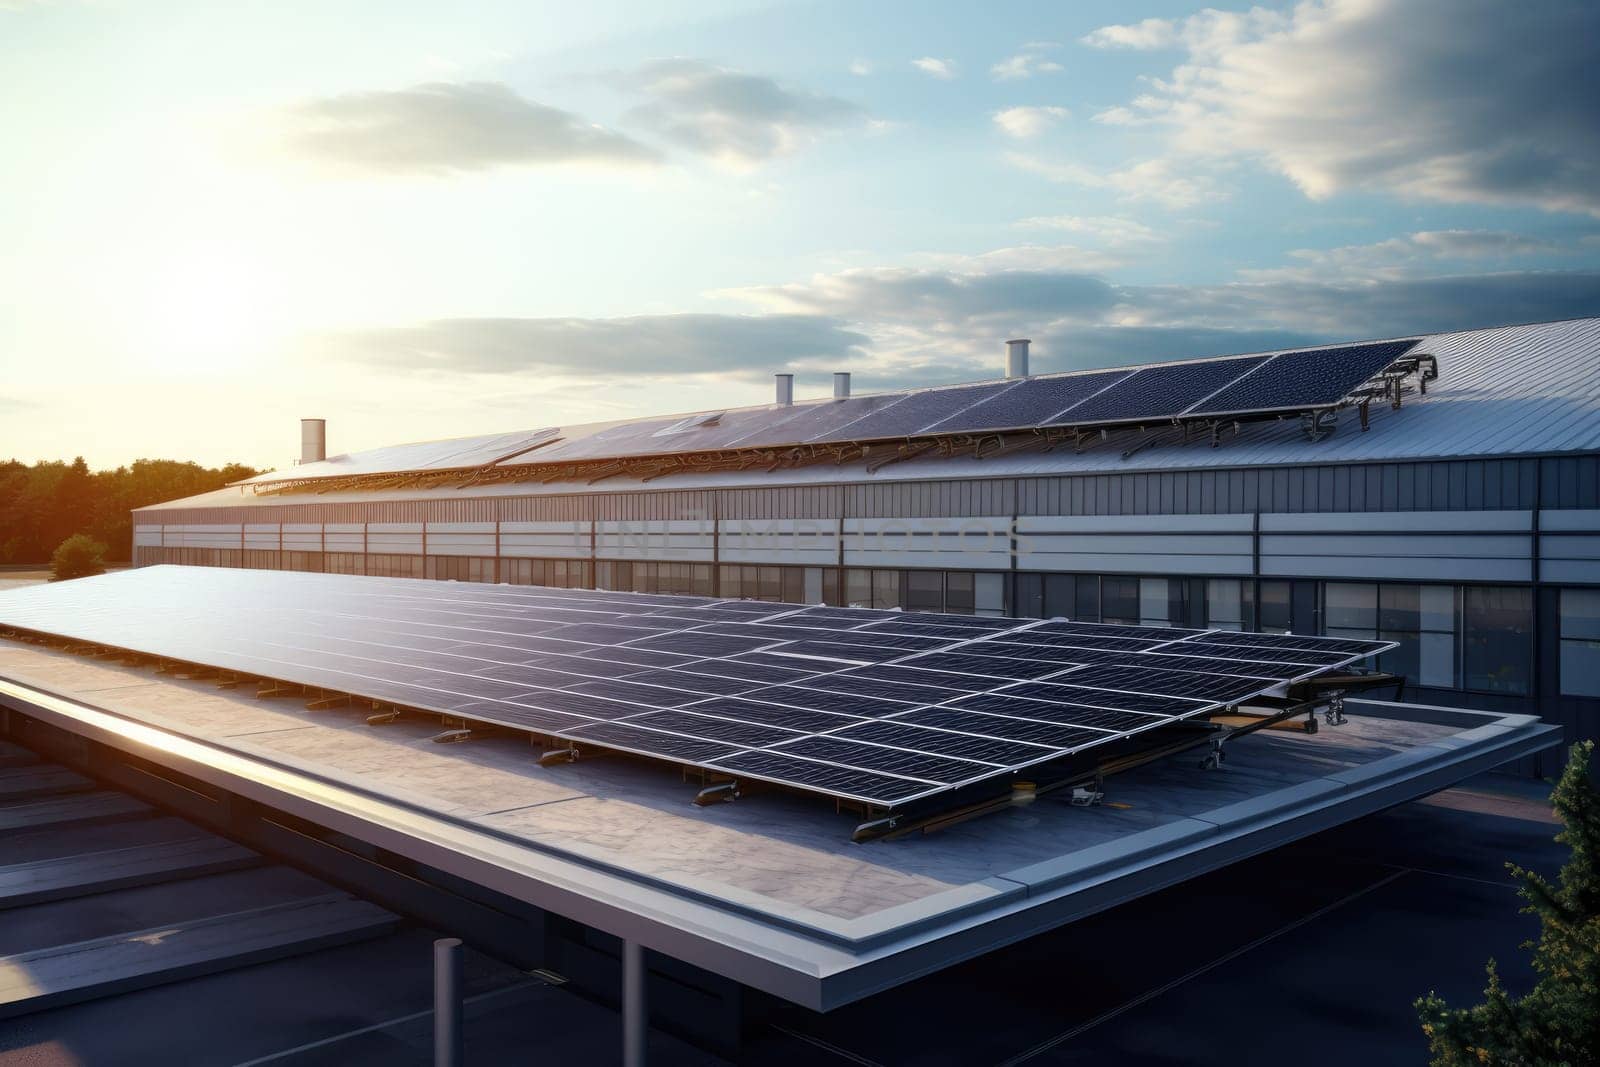 Solar Panels Providing Energy Solutions on the Roof of an Industrial Building by Yurich32